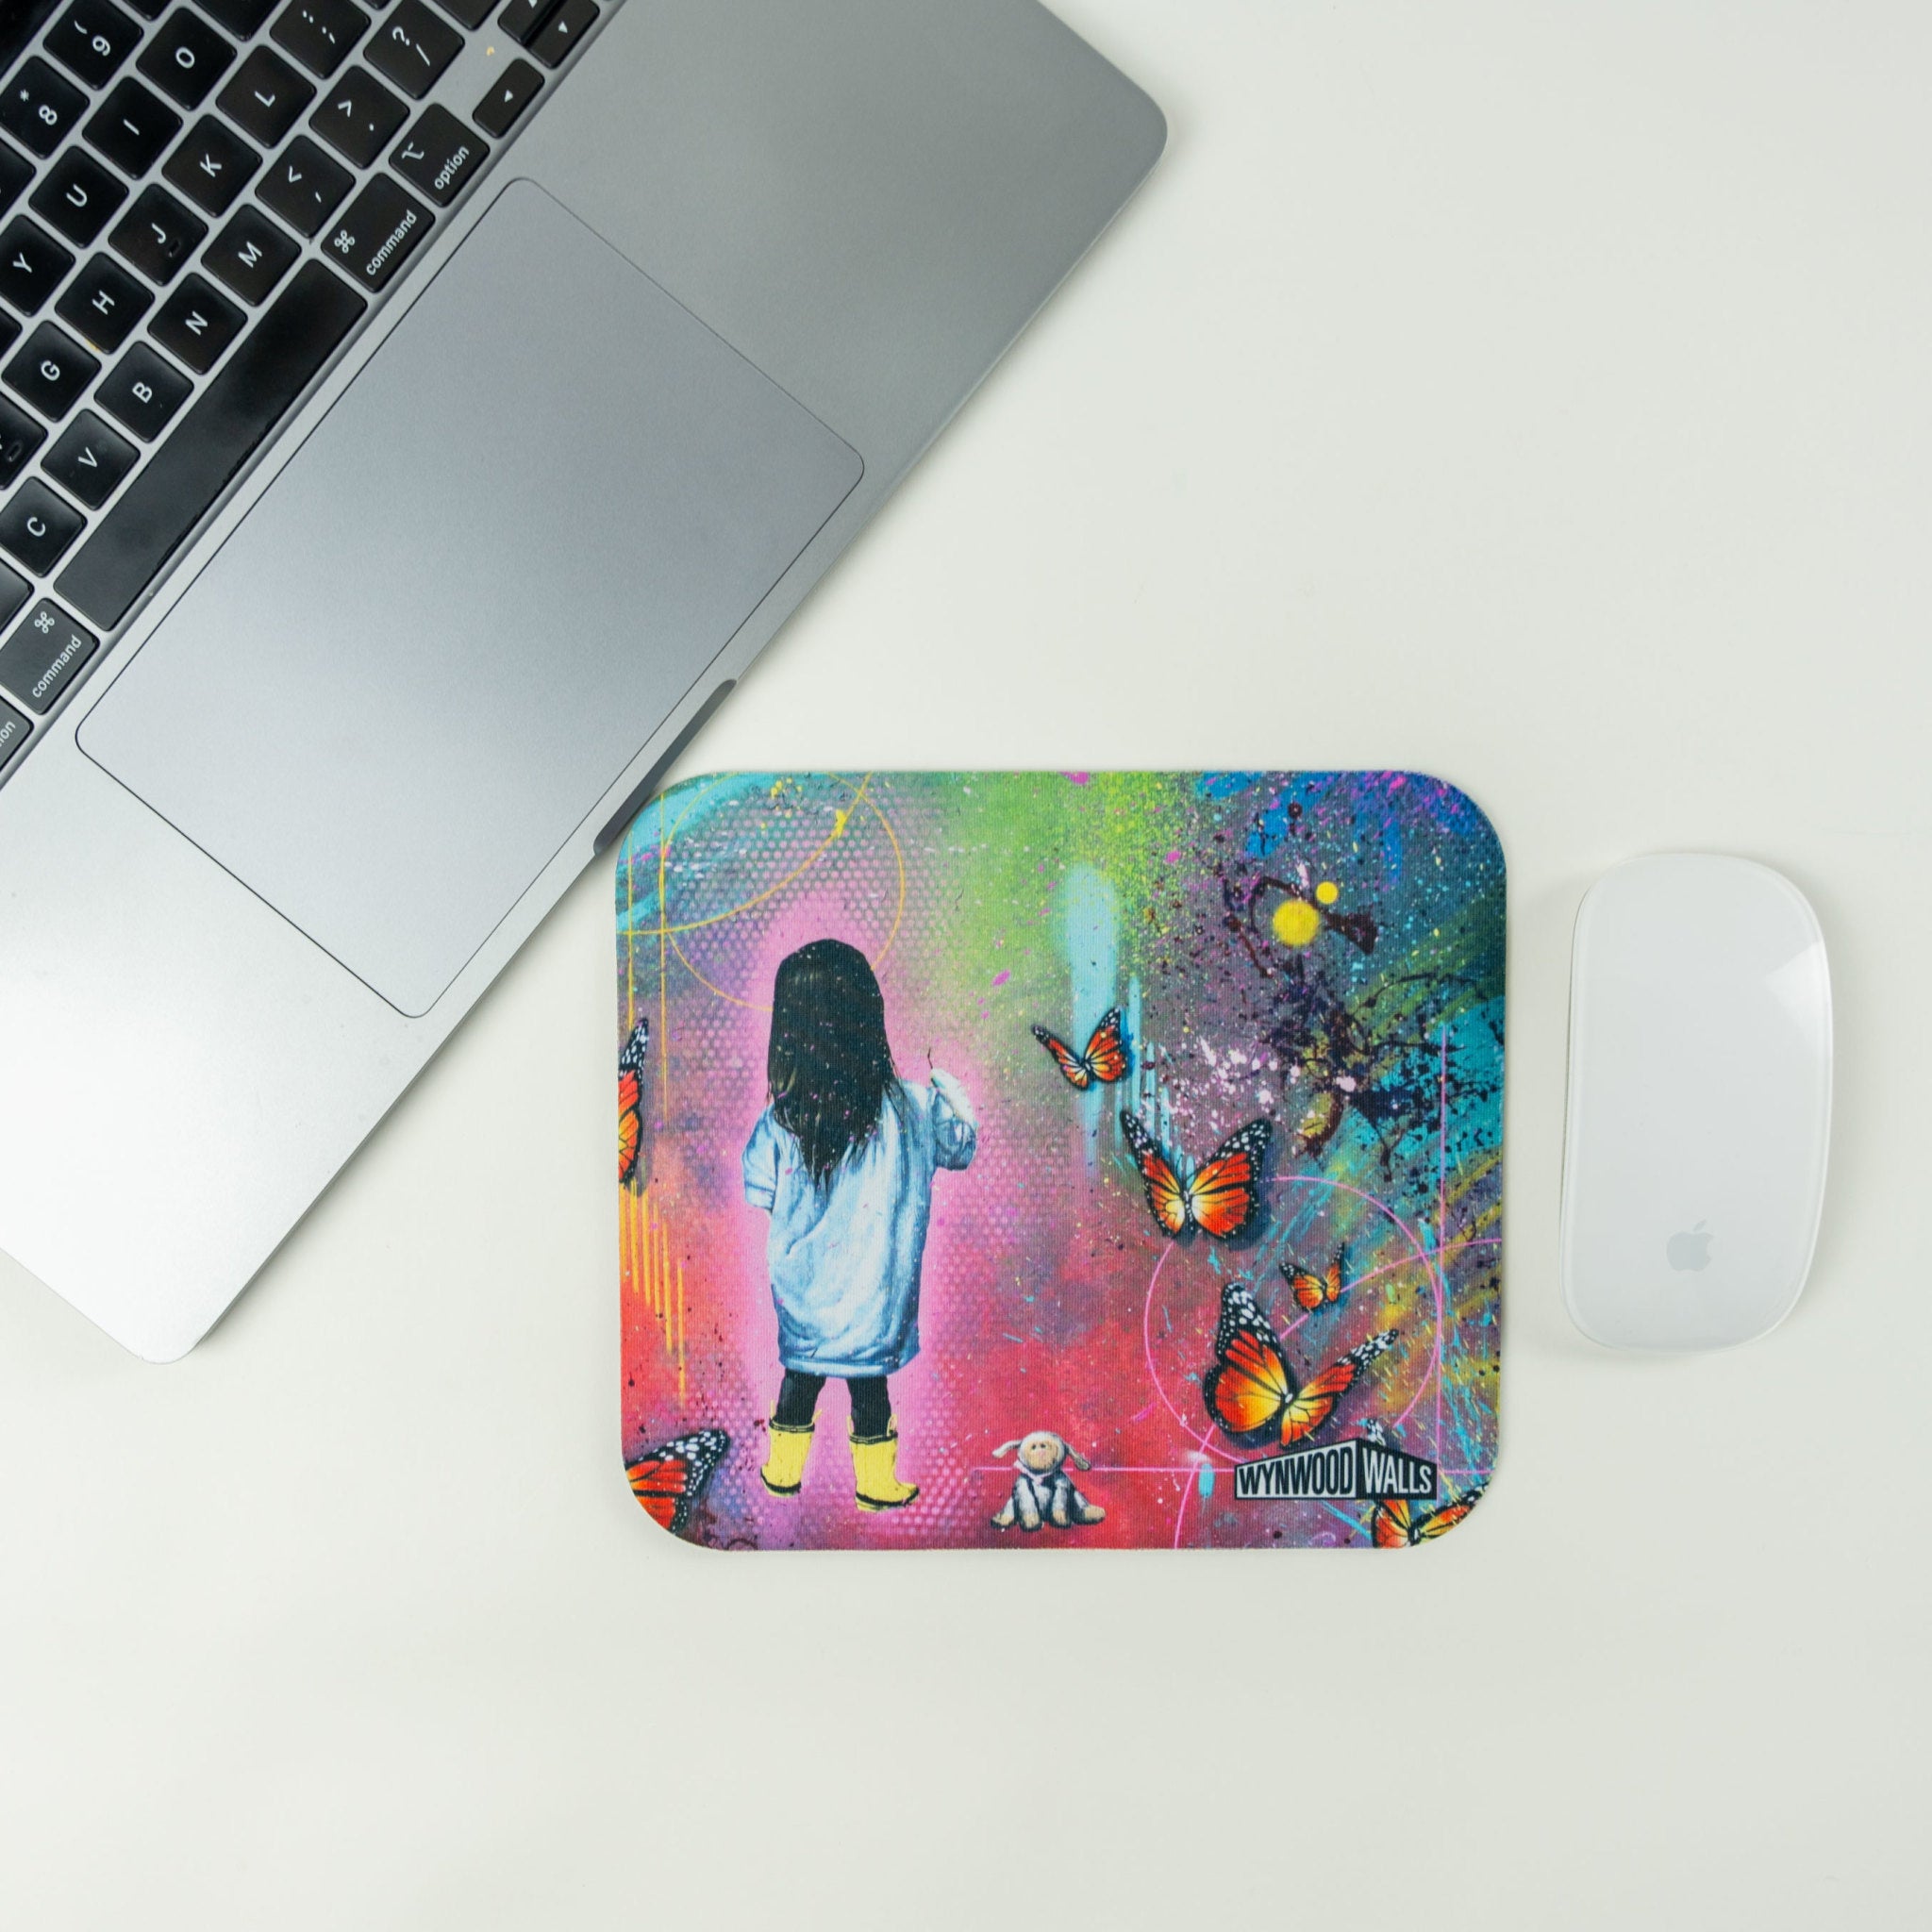 Risk Stormy BUTTERFLY Mouse Pad - Wynwood Walls Shop